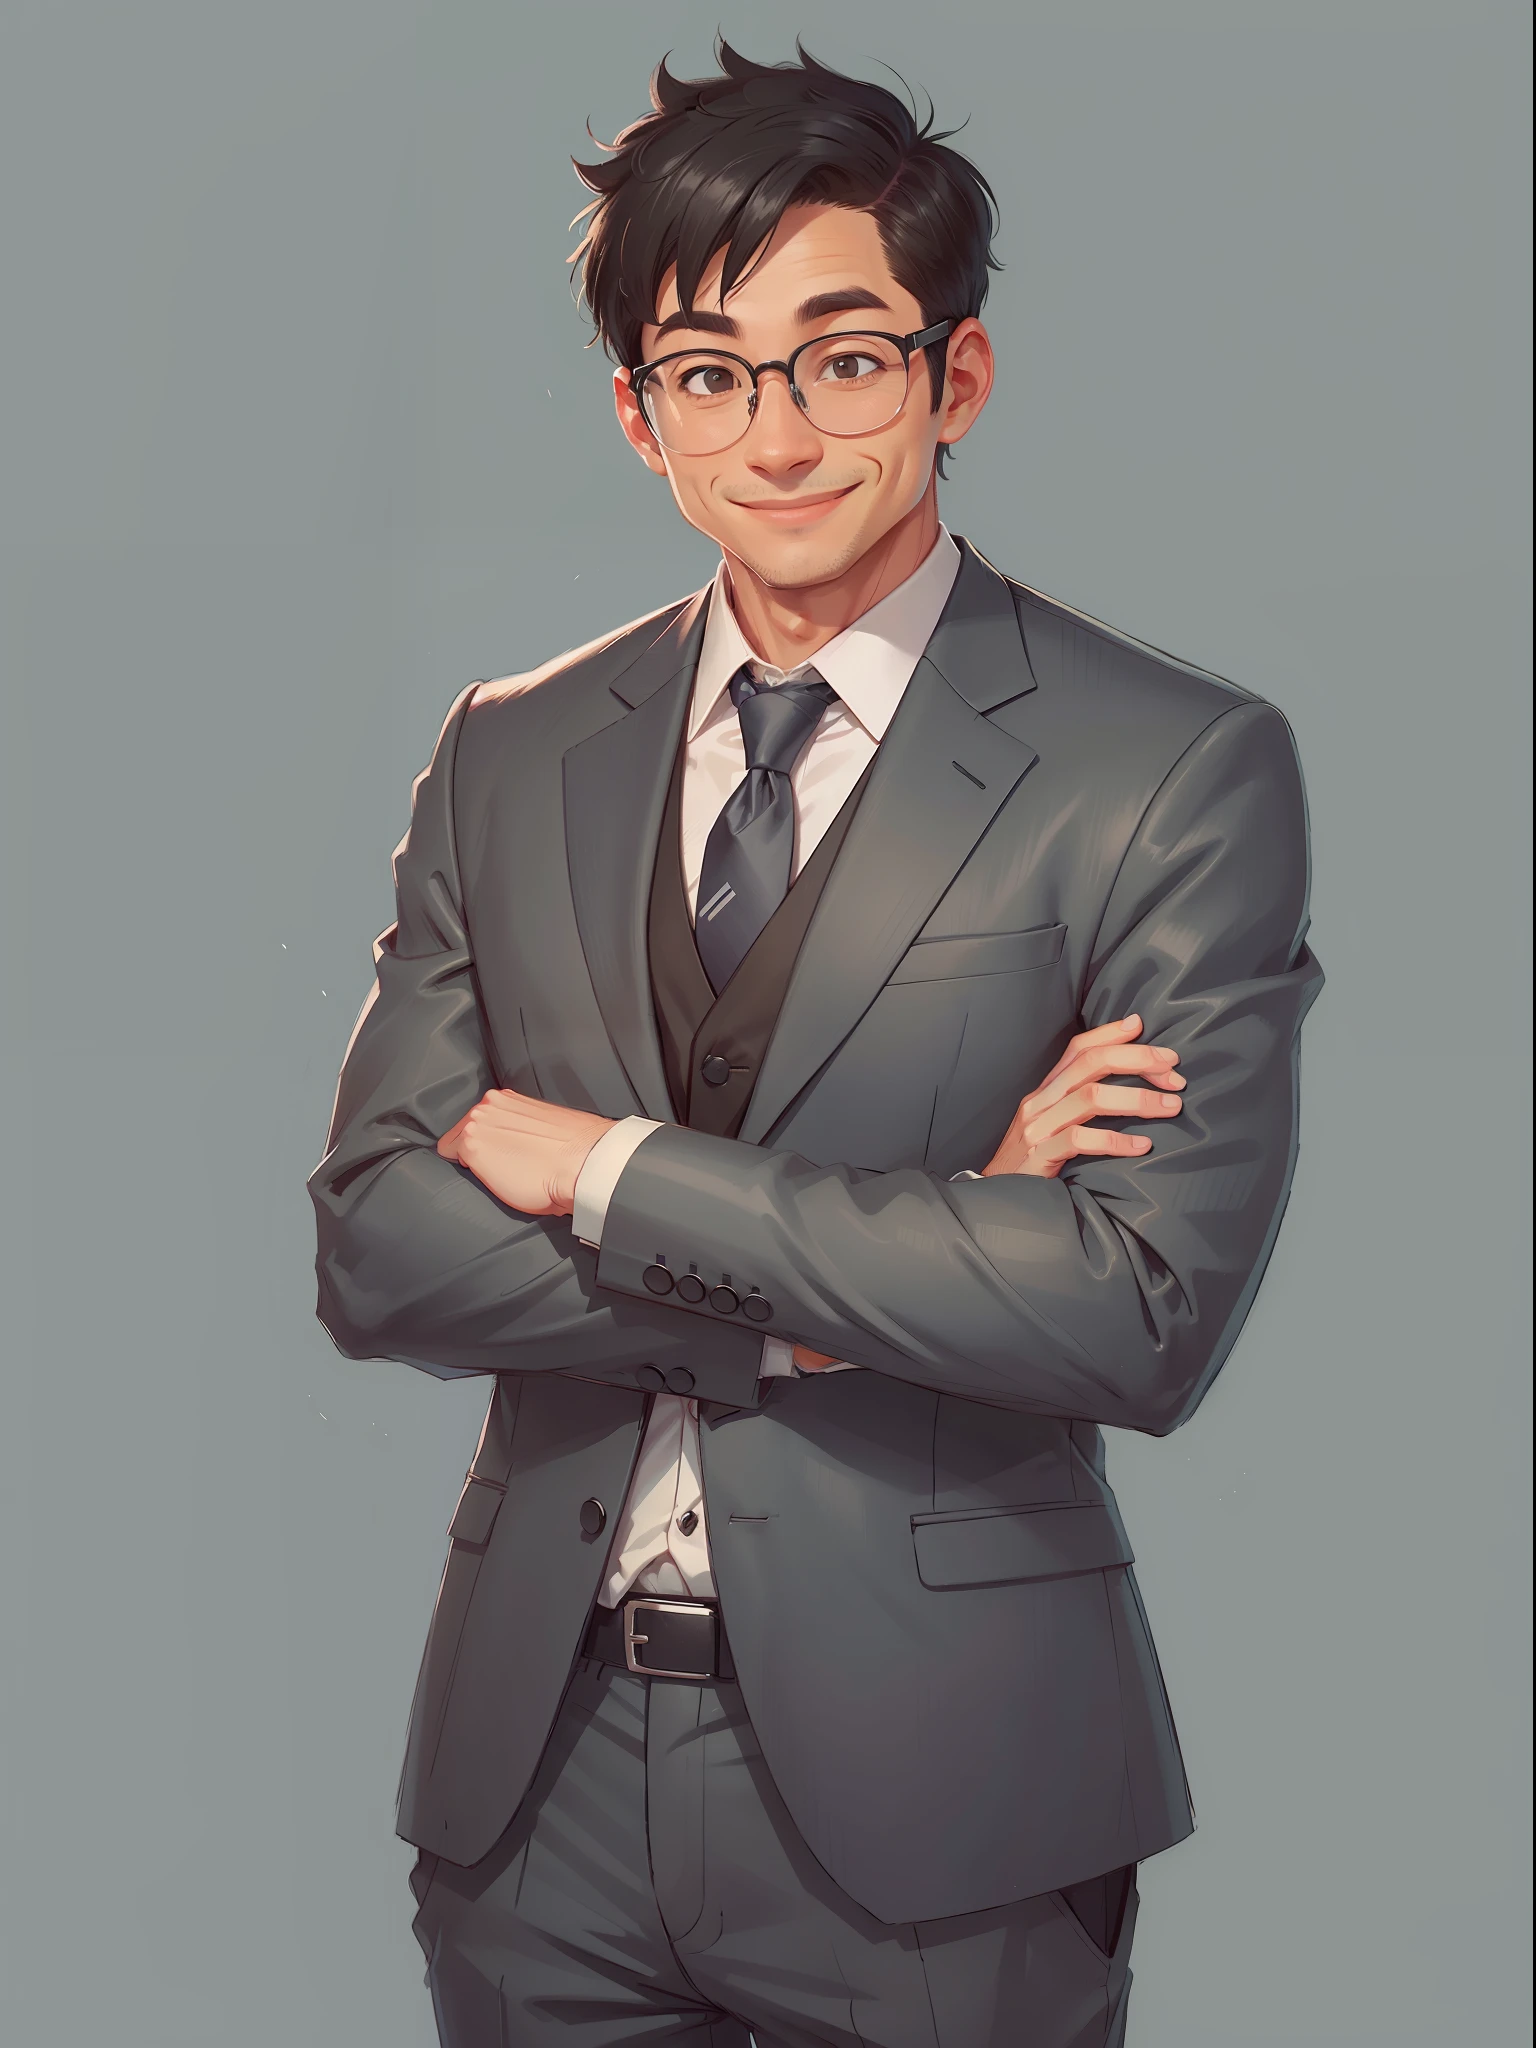 Gray background, simple background, 1 man, teacher, suit, glasses, short black hair, smile, standing, very detailed, best quality, 4K